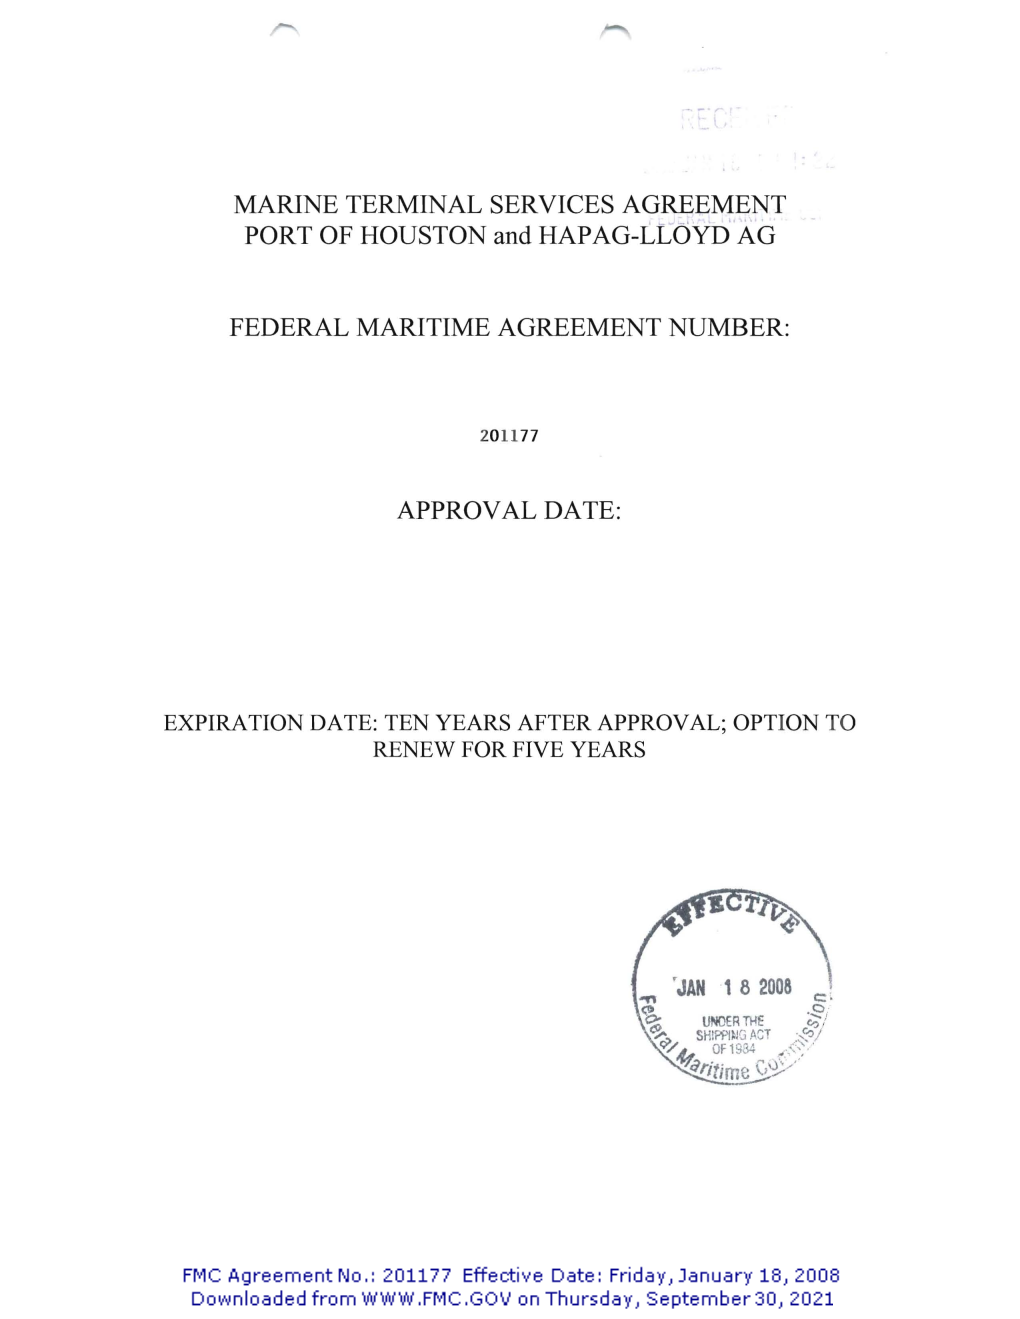 MARINE TERMINAL SERVICES AGREEMENT PORT of HOUSTON and HAPAG-LLOVD"A.G